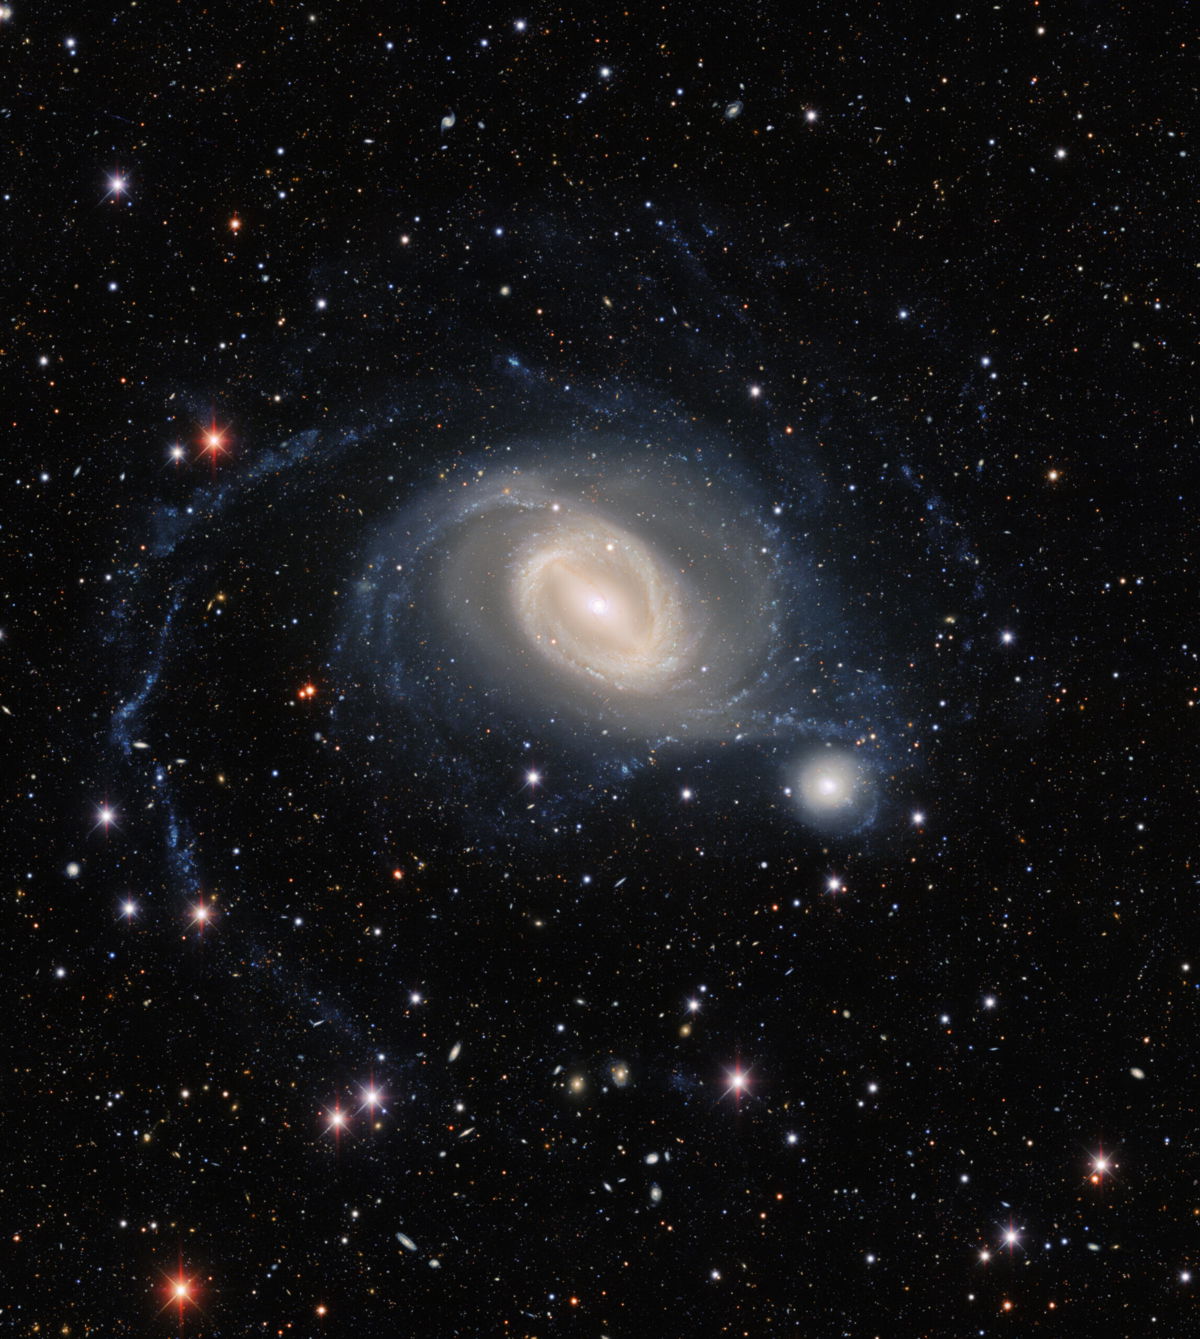 <i>NOIRLab/Dark Energy Survey</i><br/>A stunning 'galactic ballet' was captured in new telescope image. Galaxies NGC 1512 (left) and NGC 1510 swirl together in a dance that will eventually bring them together in this new image from the Dark Energy Camera.